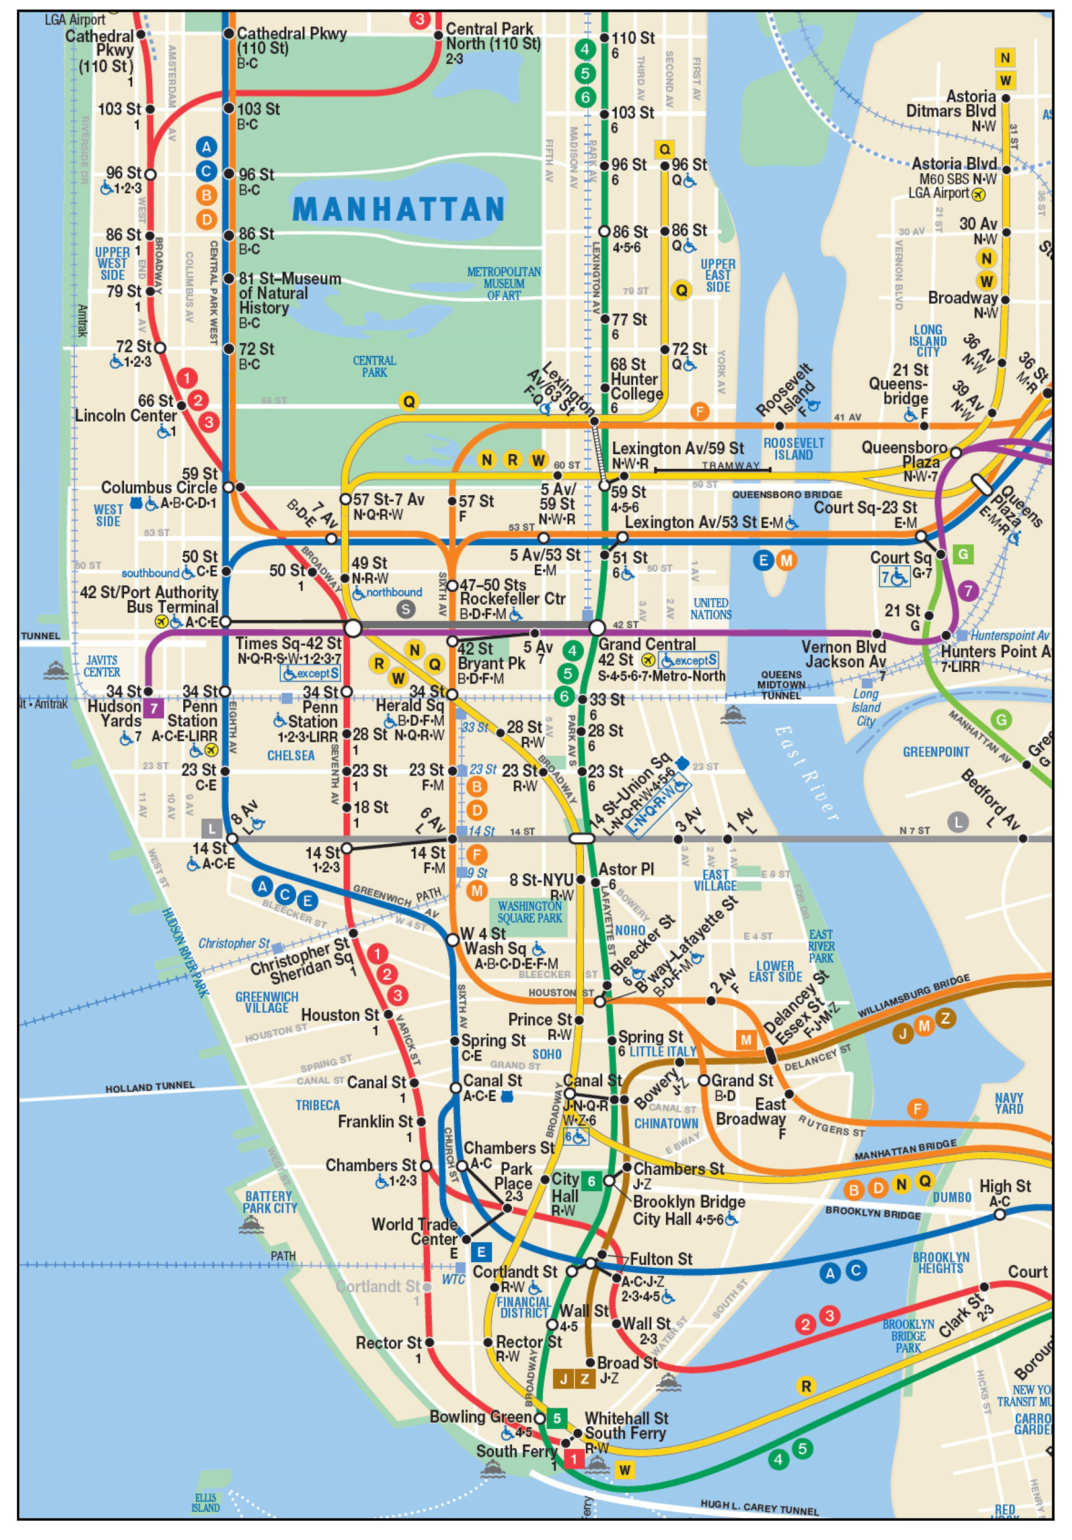 The Second Avenue Subway Officially Opens January 1st